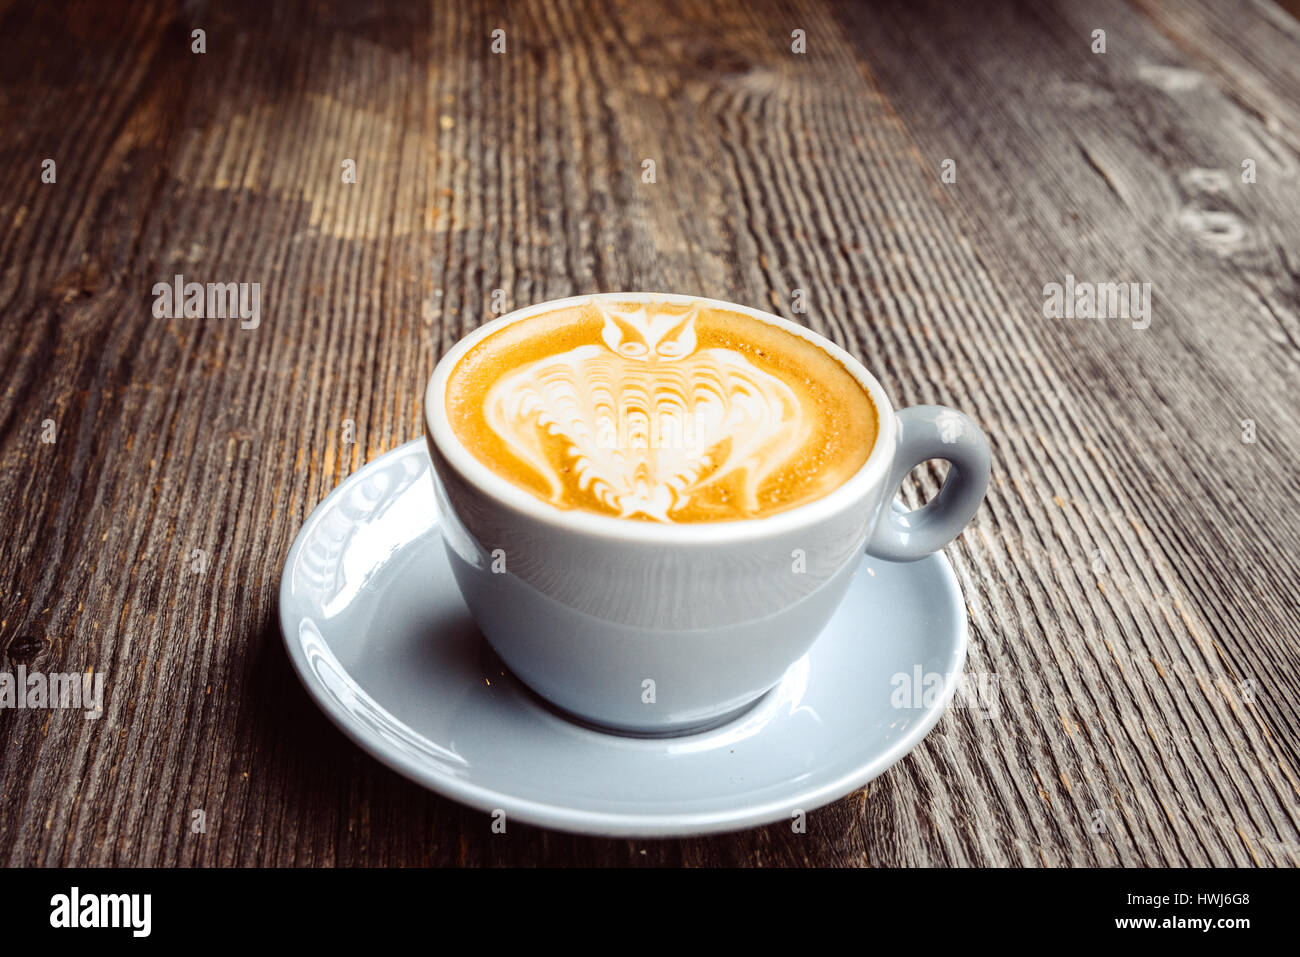 Froth Stock Photos - 335,218 Images